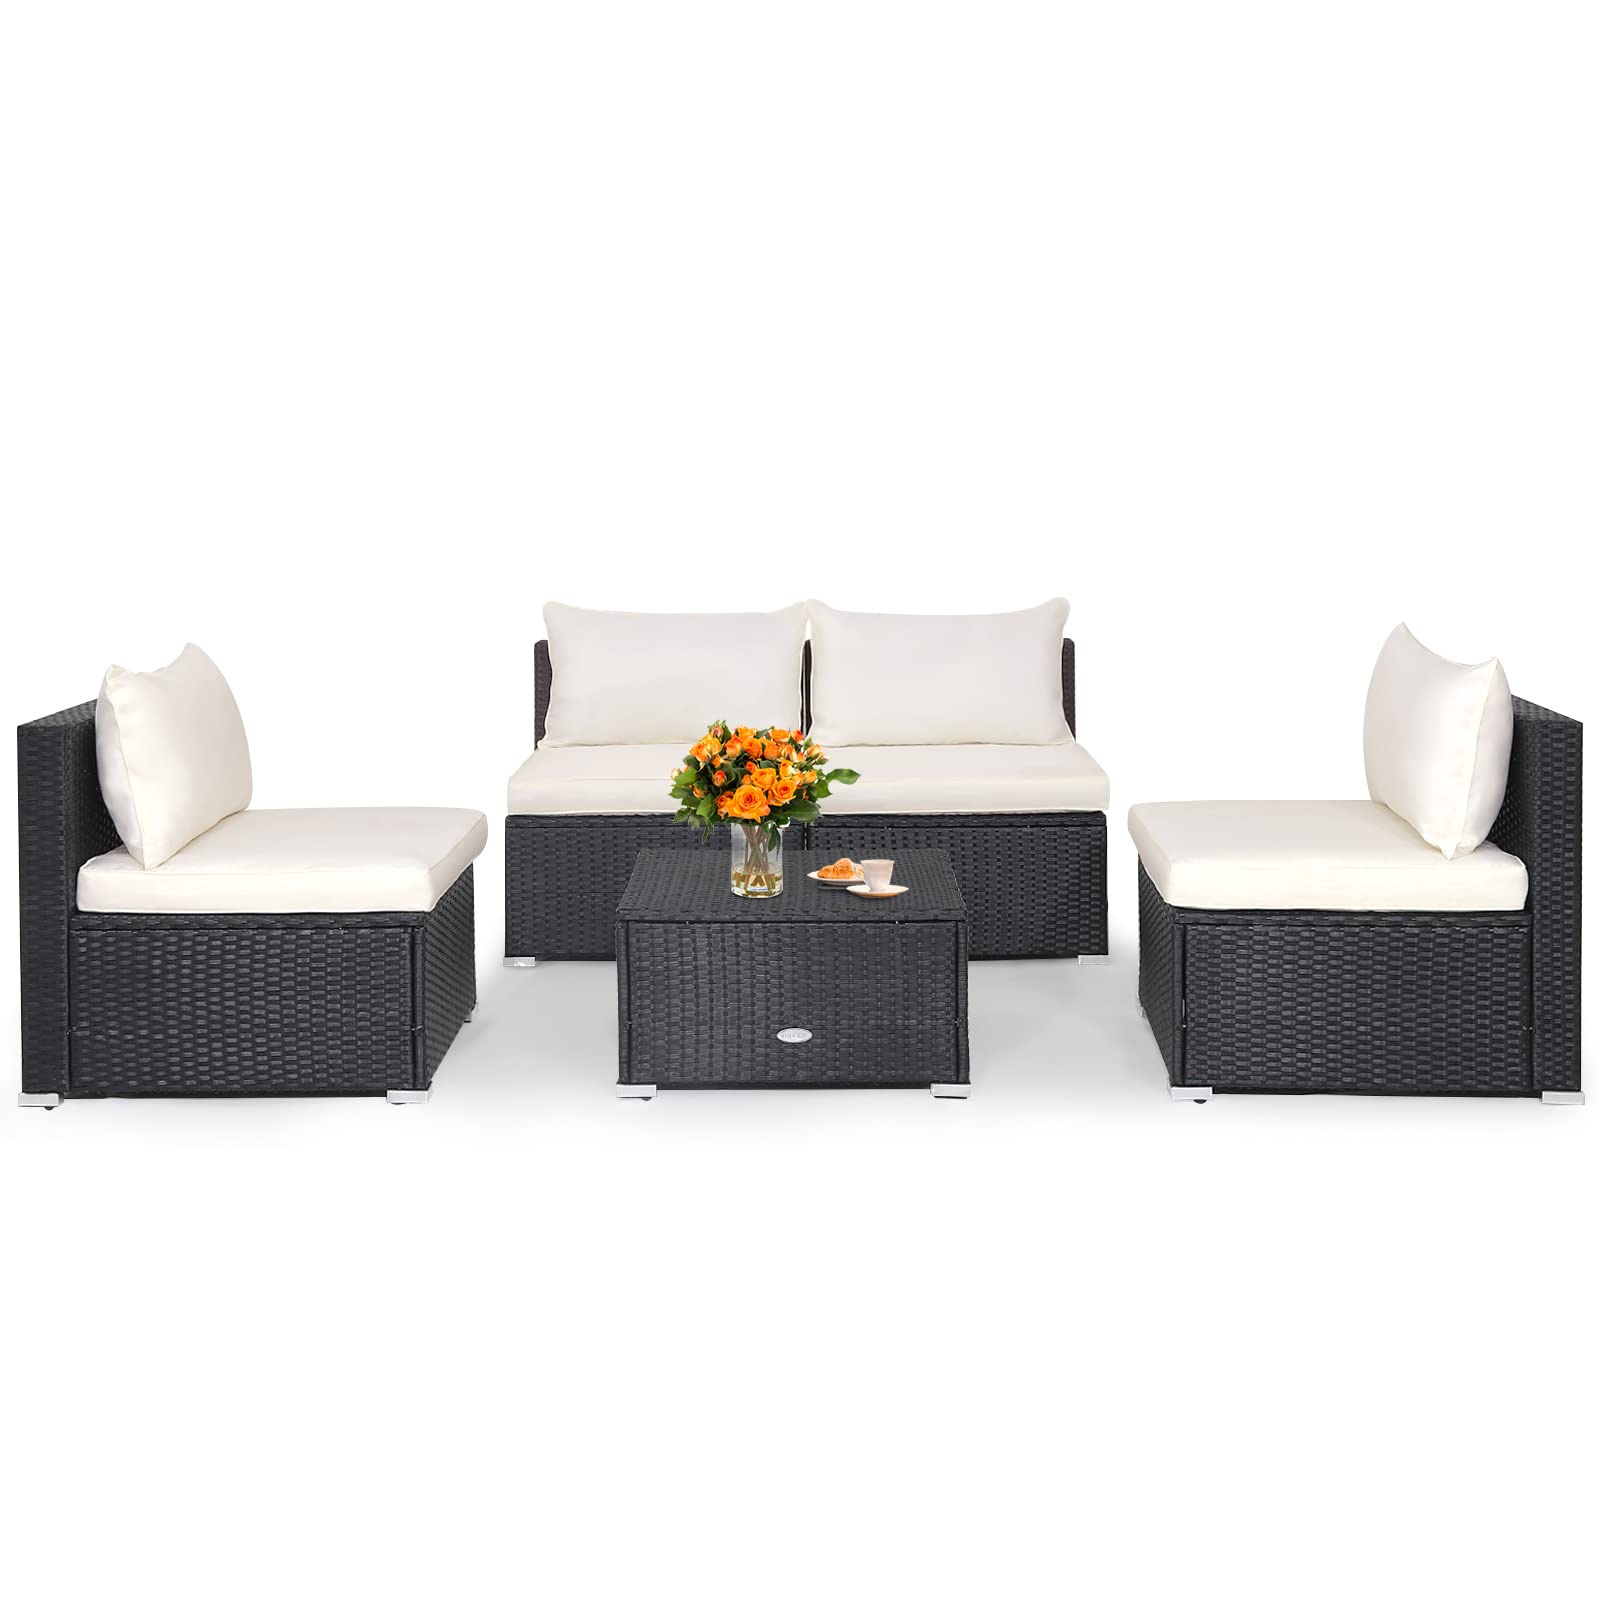 Tangkula 5-Piece Outdoor Patio Furniture Set, Patiojoy PE Wicker Conversation Set with Cushions and Coffee Table